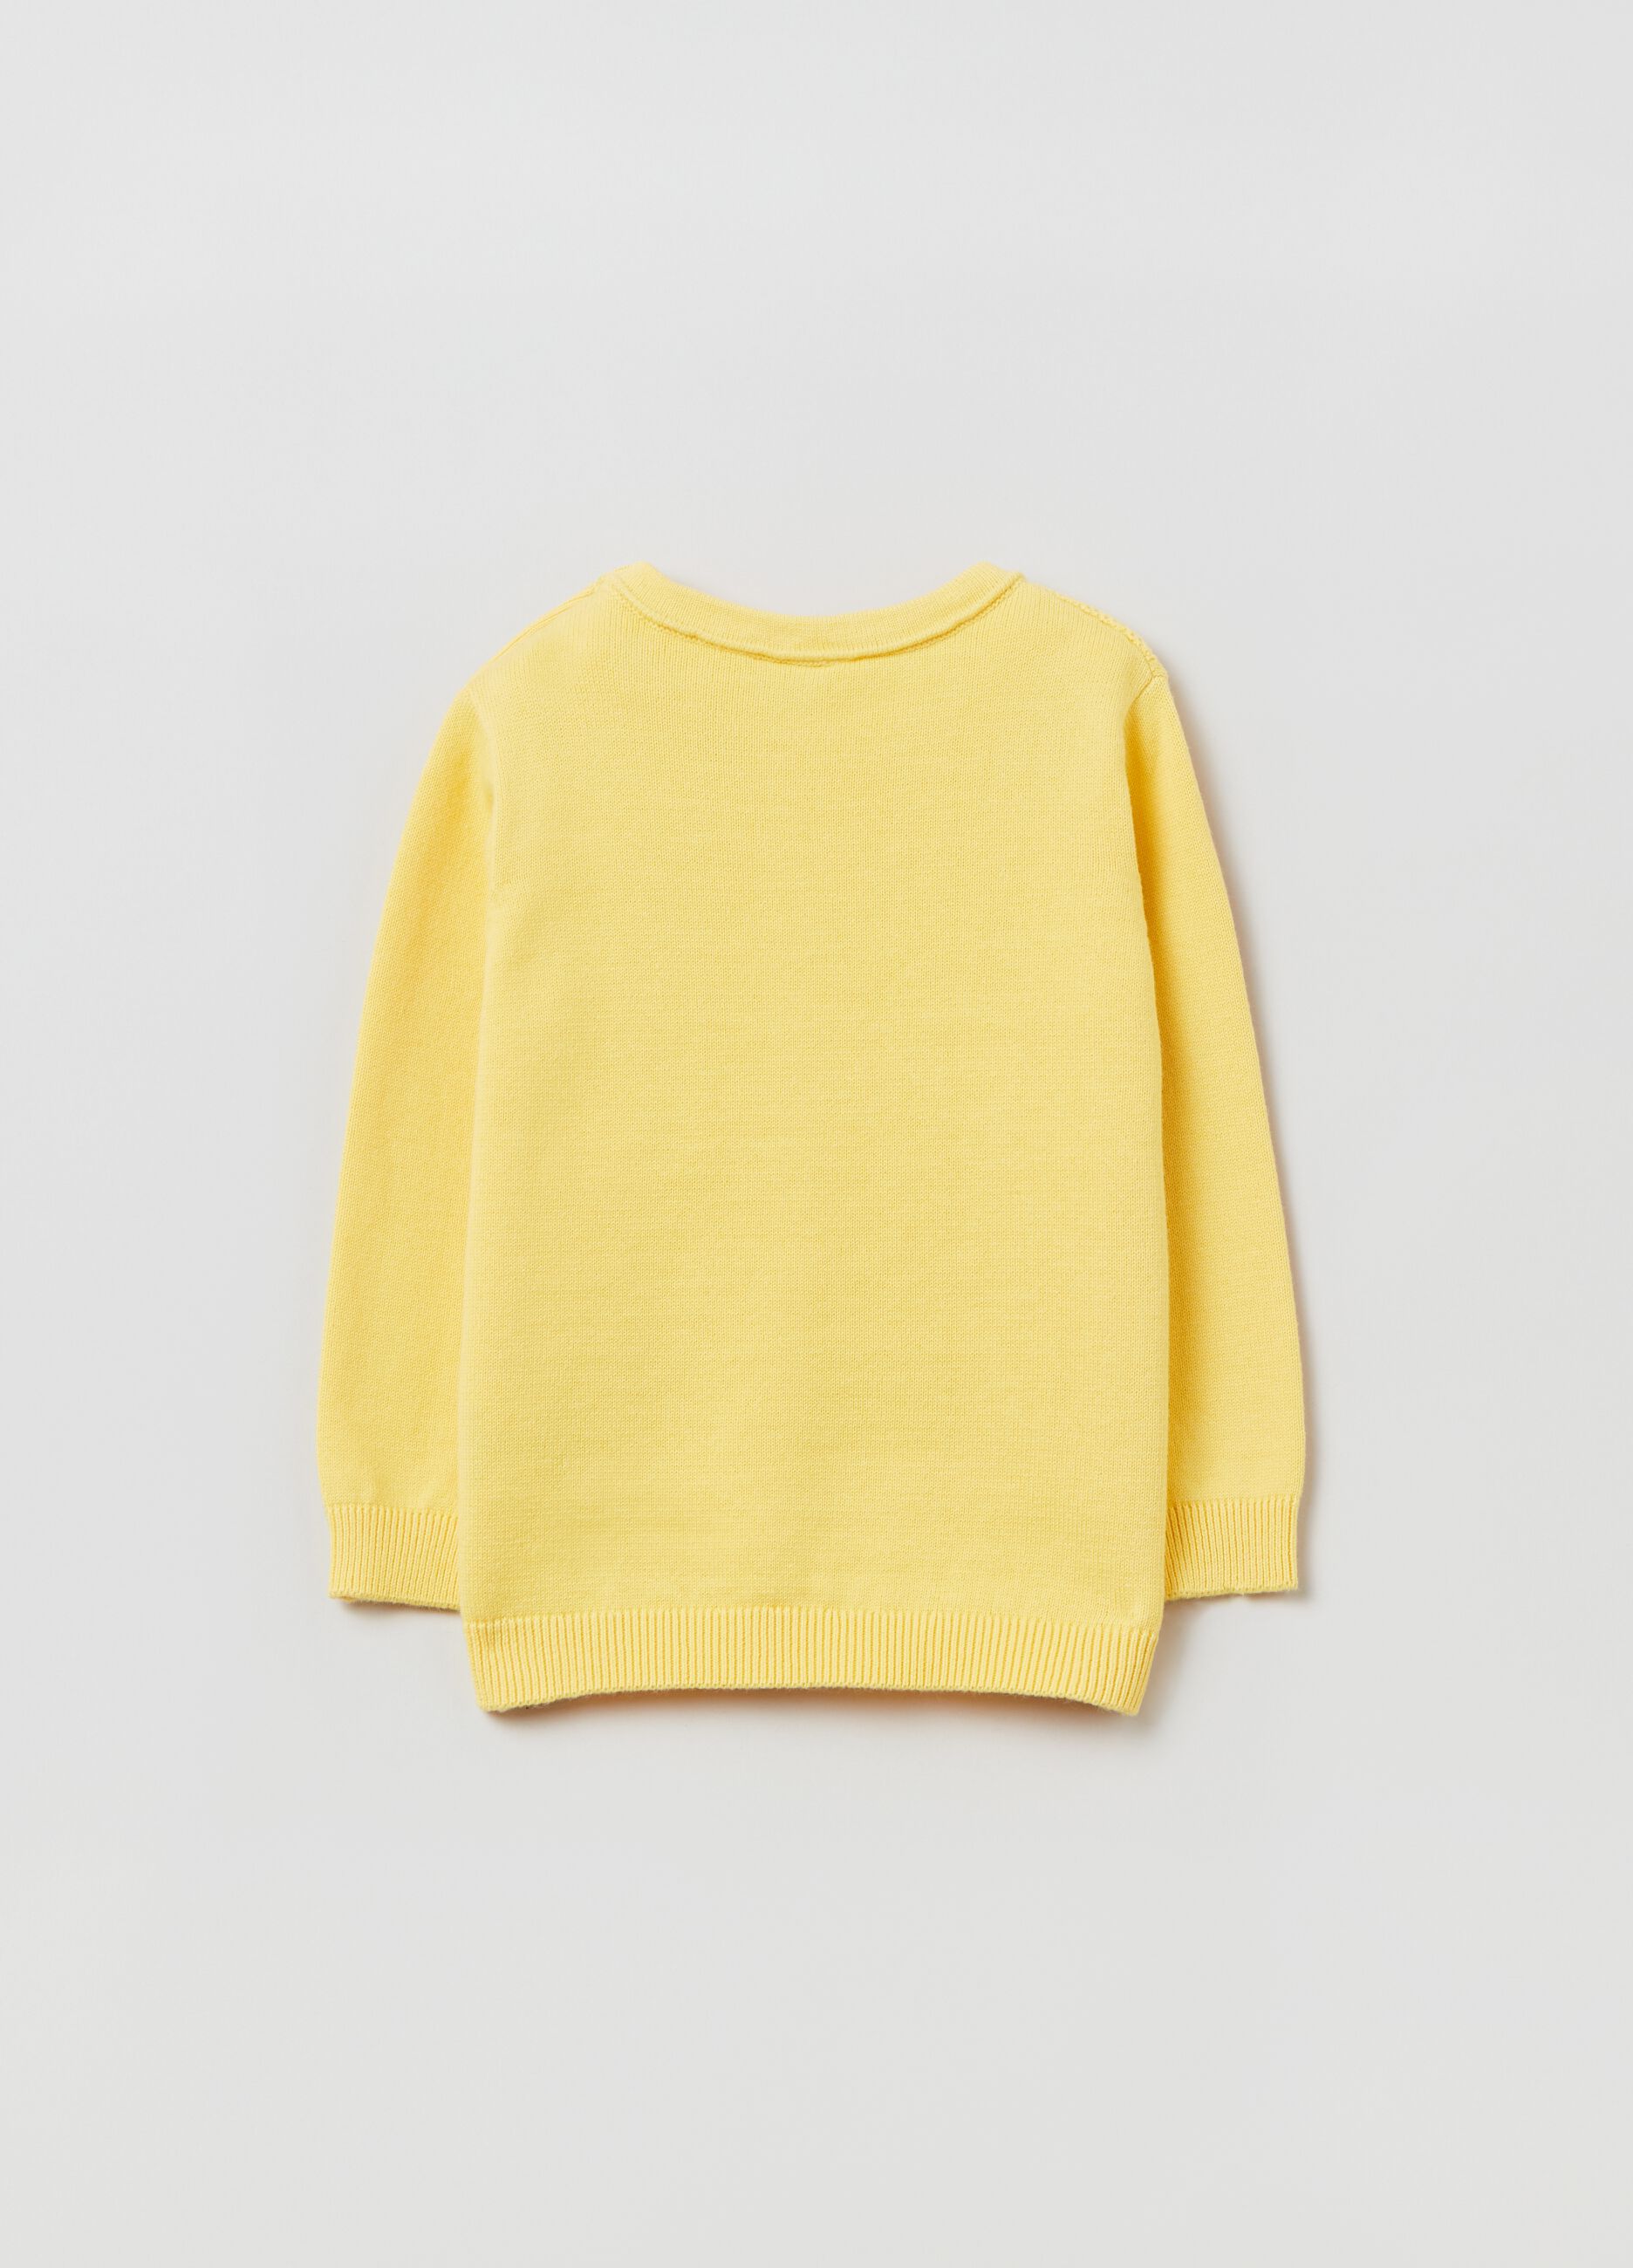 Pullover in knitted cotton with round neck